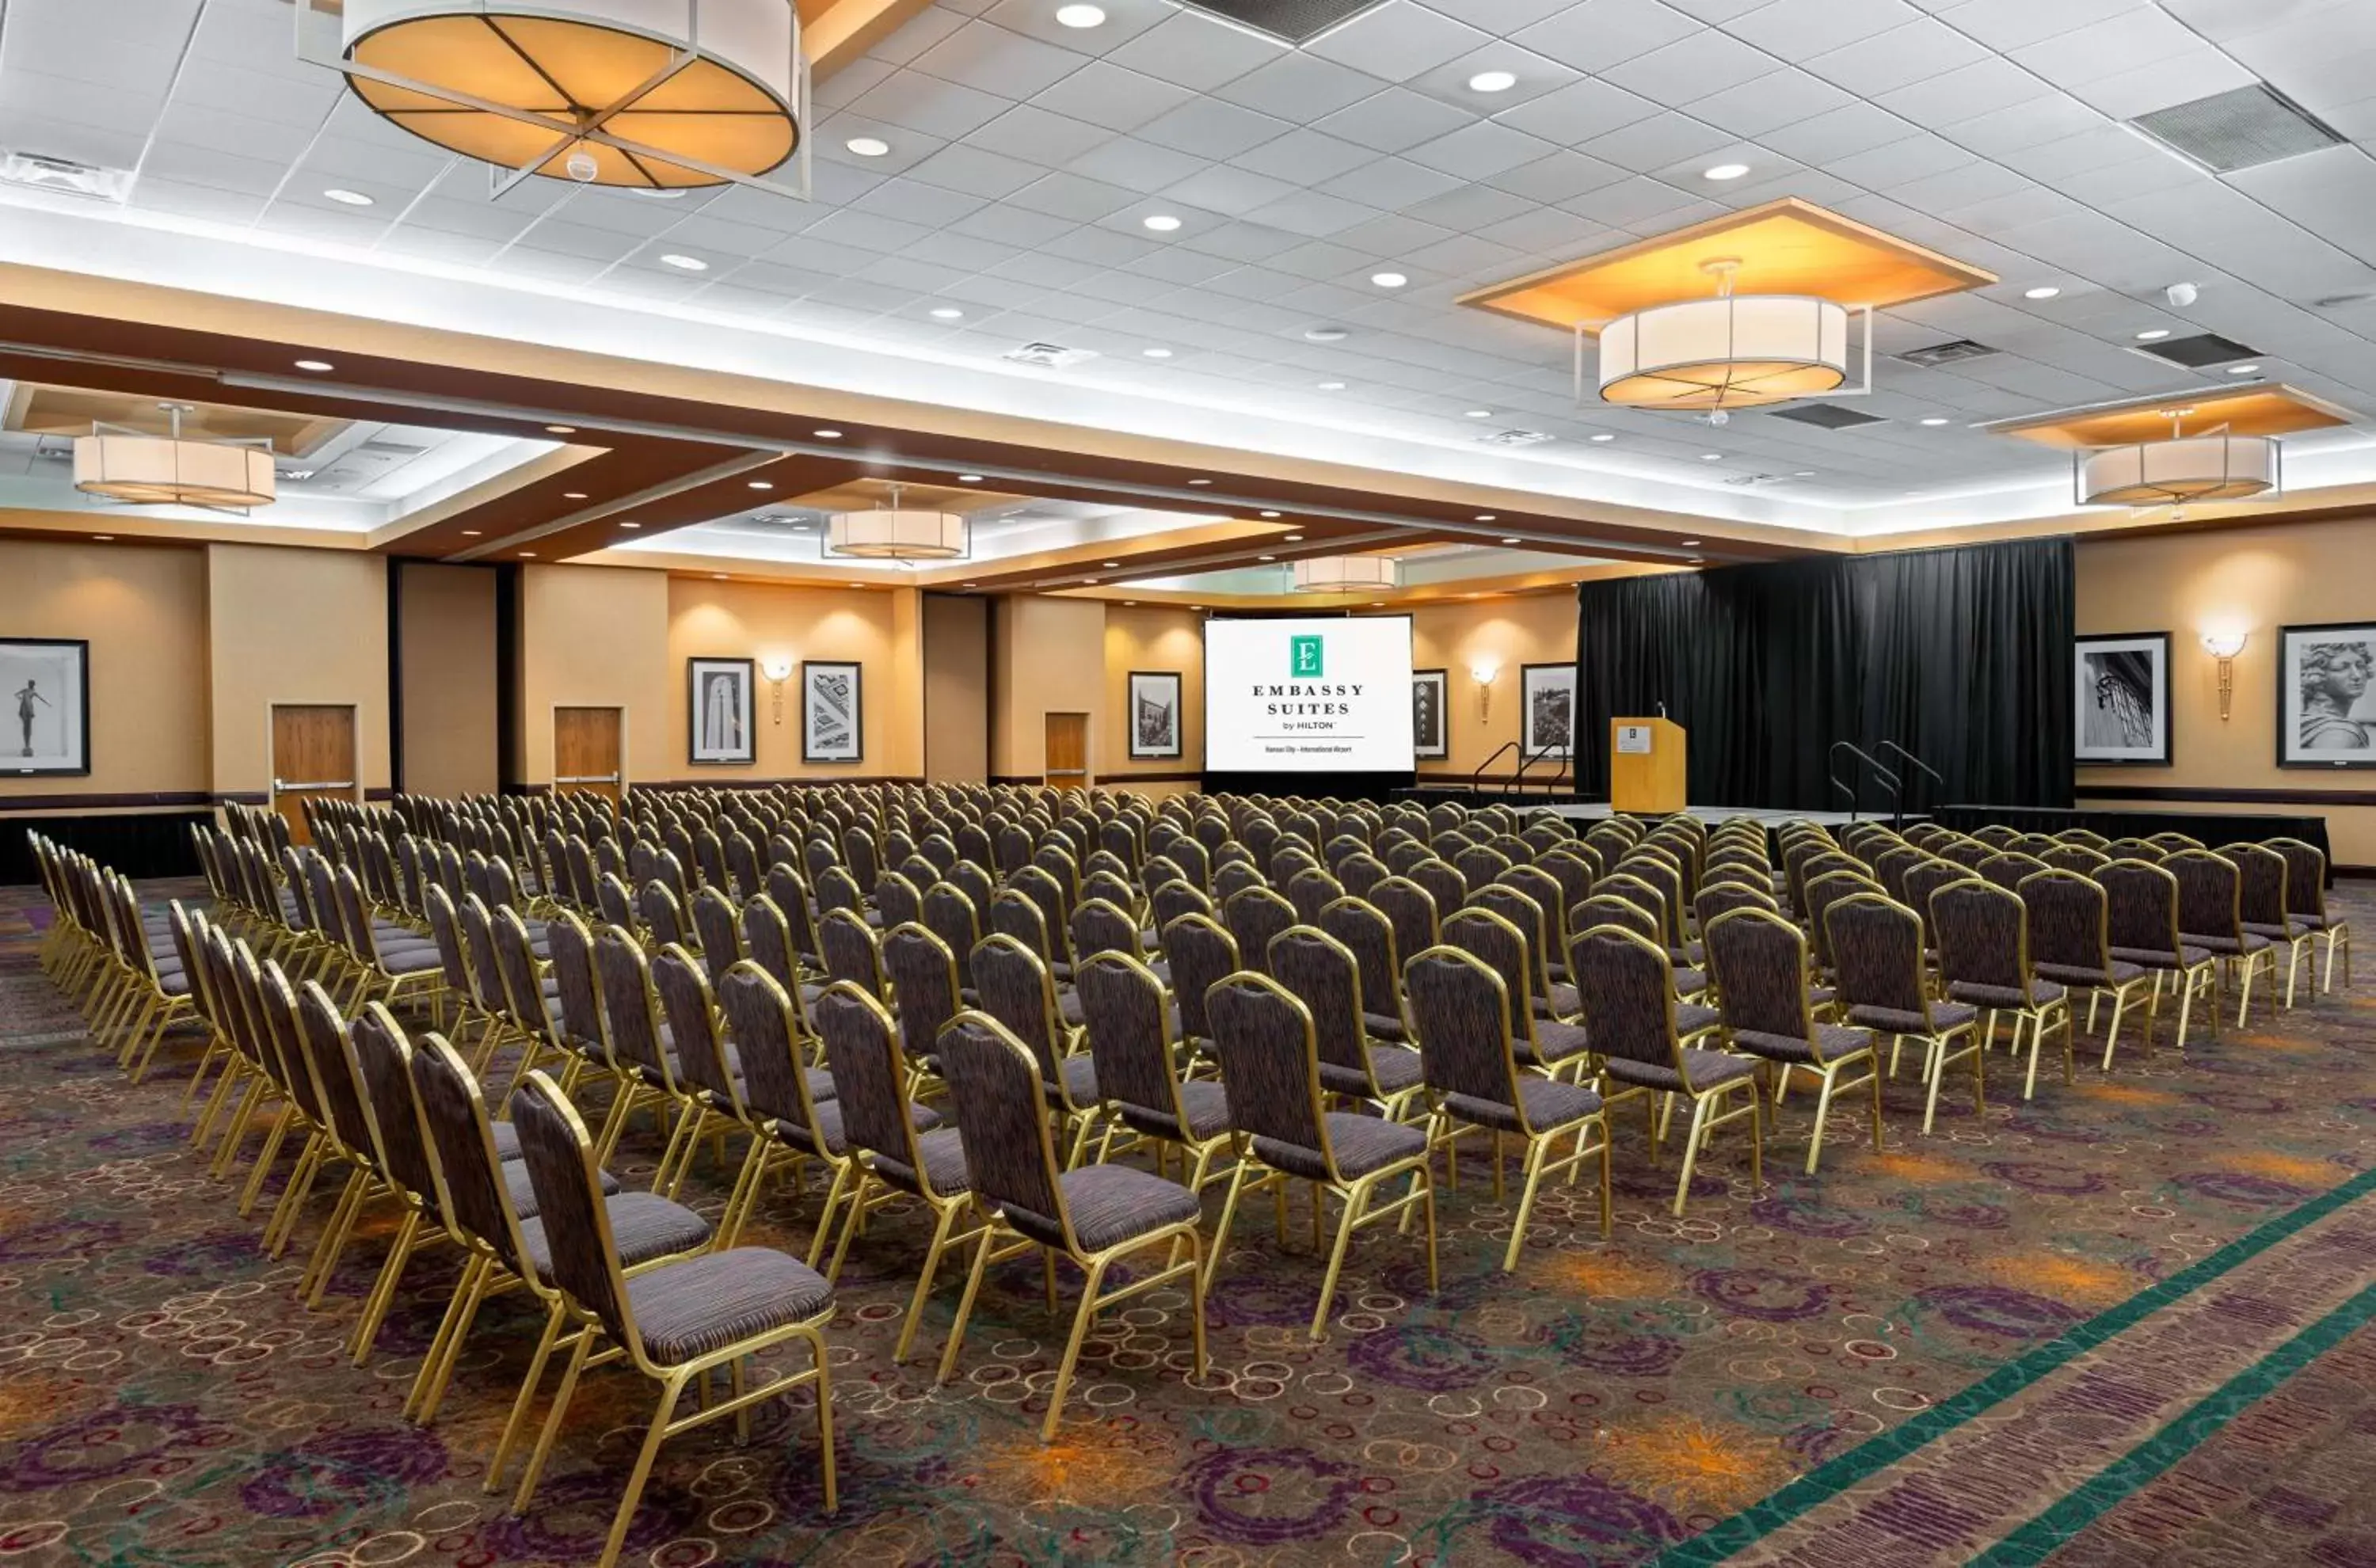 Meeting/conference room in Embassy Suites by Hilton Kansas City International Airport